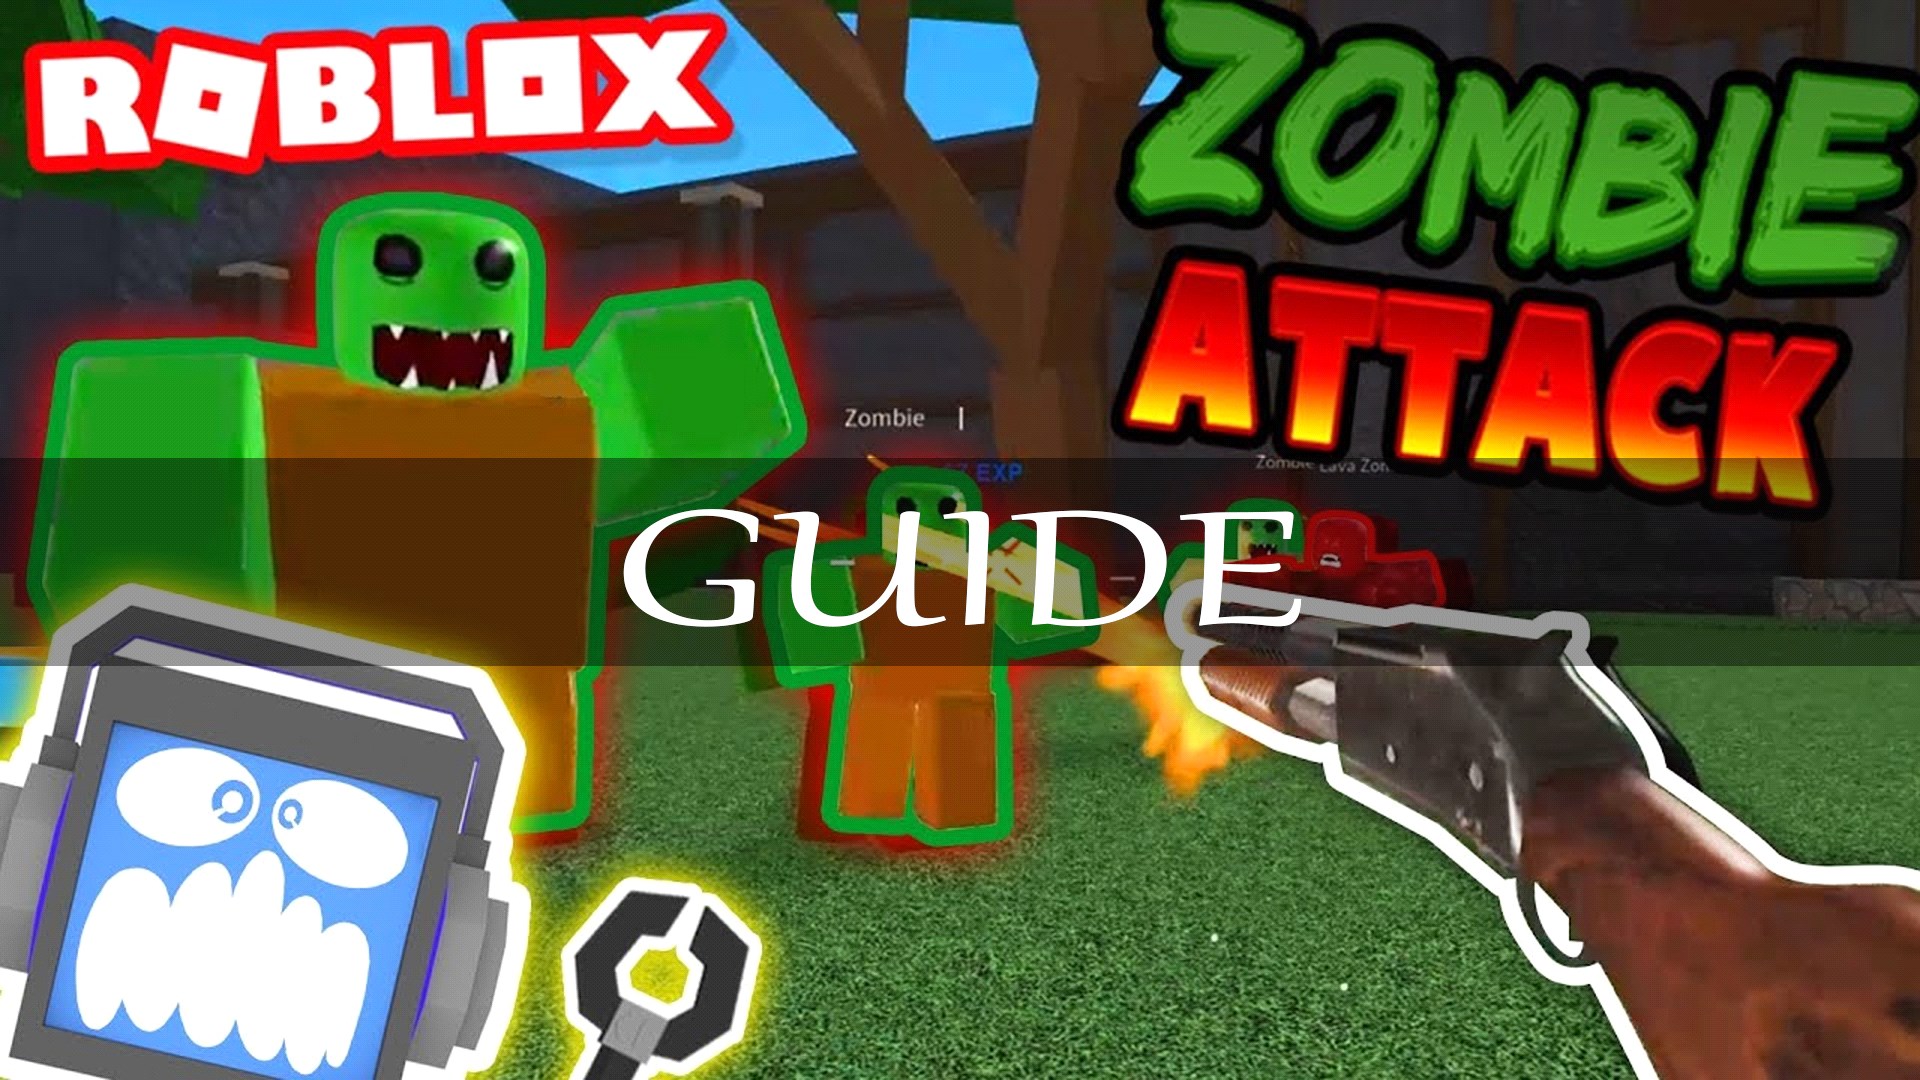 Buy Roblox Zombie Attack Game Guide Microsoft Store - roblox game guide